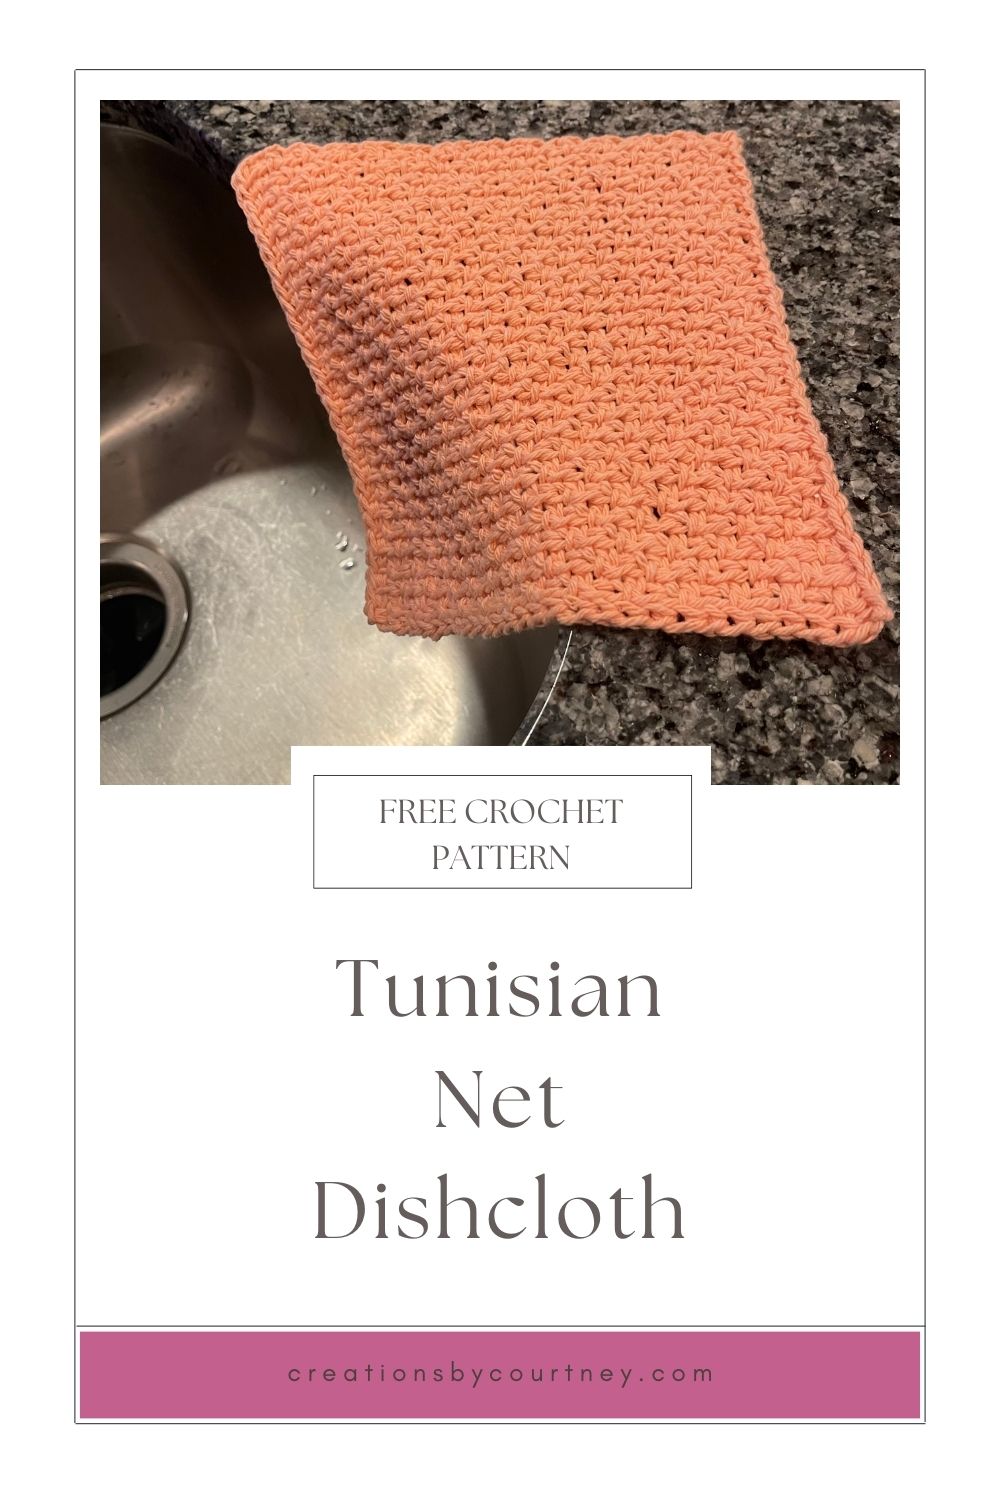 An image of a tunisian crochet dishcloth laying on the edge of a black and gray granite countertop and hanging down towards a stainless steel sink.